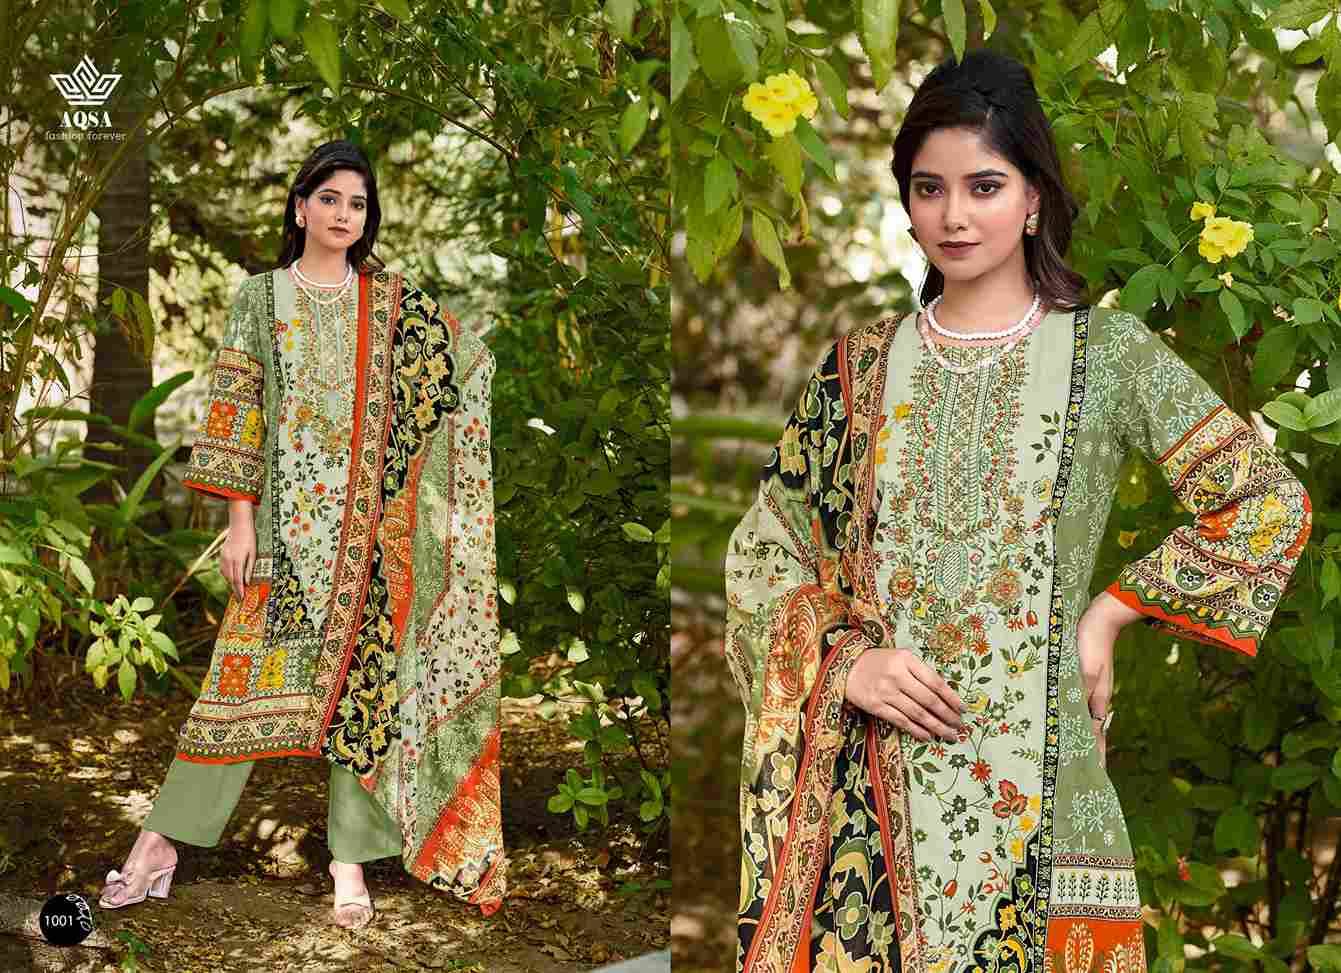 Jashn By Aqsa 1001 To 1006 Series Beautiful Festive Suits Stylish Fancy Colorful Casual Wear & Ethnic Wear Cambric Cotton Print Dresses At Wholesale Price